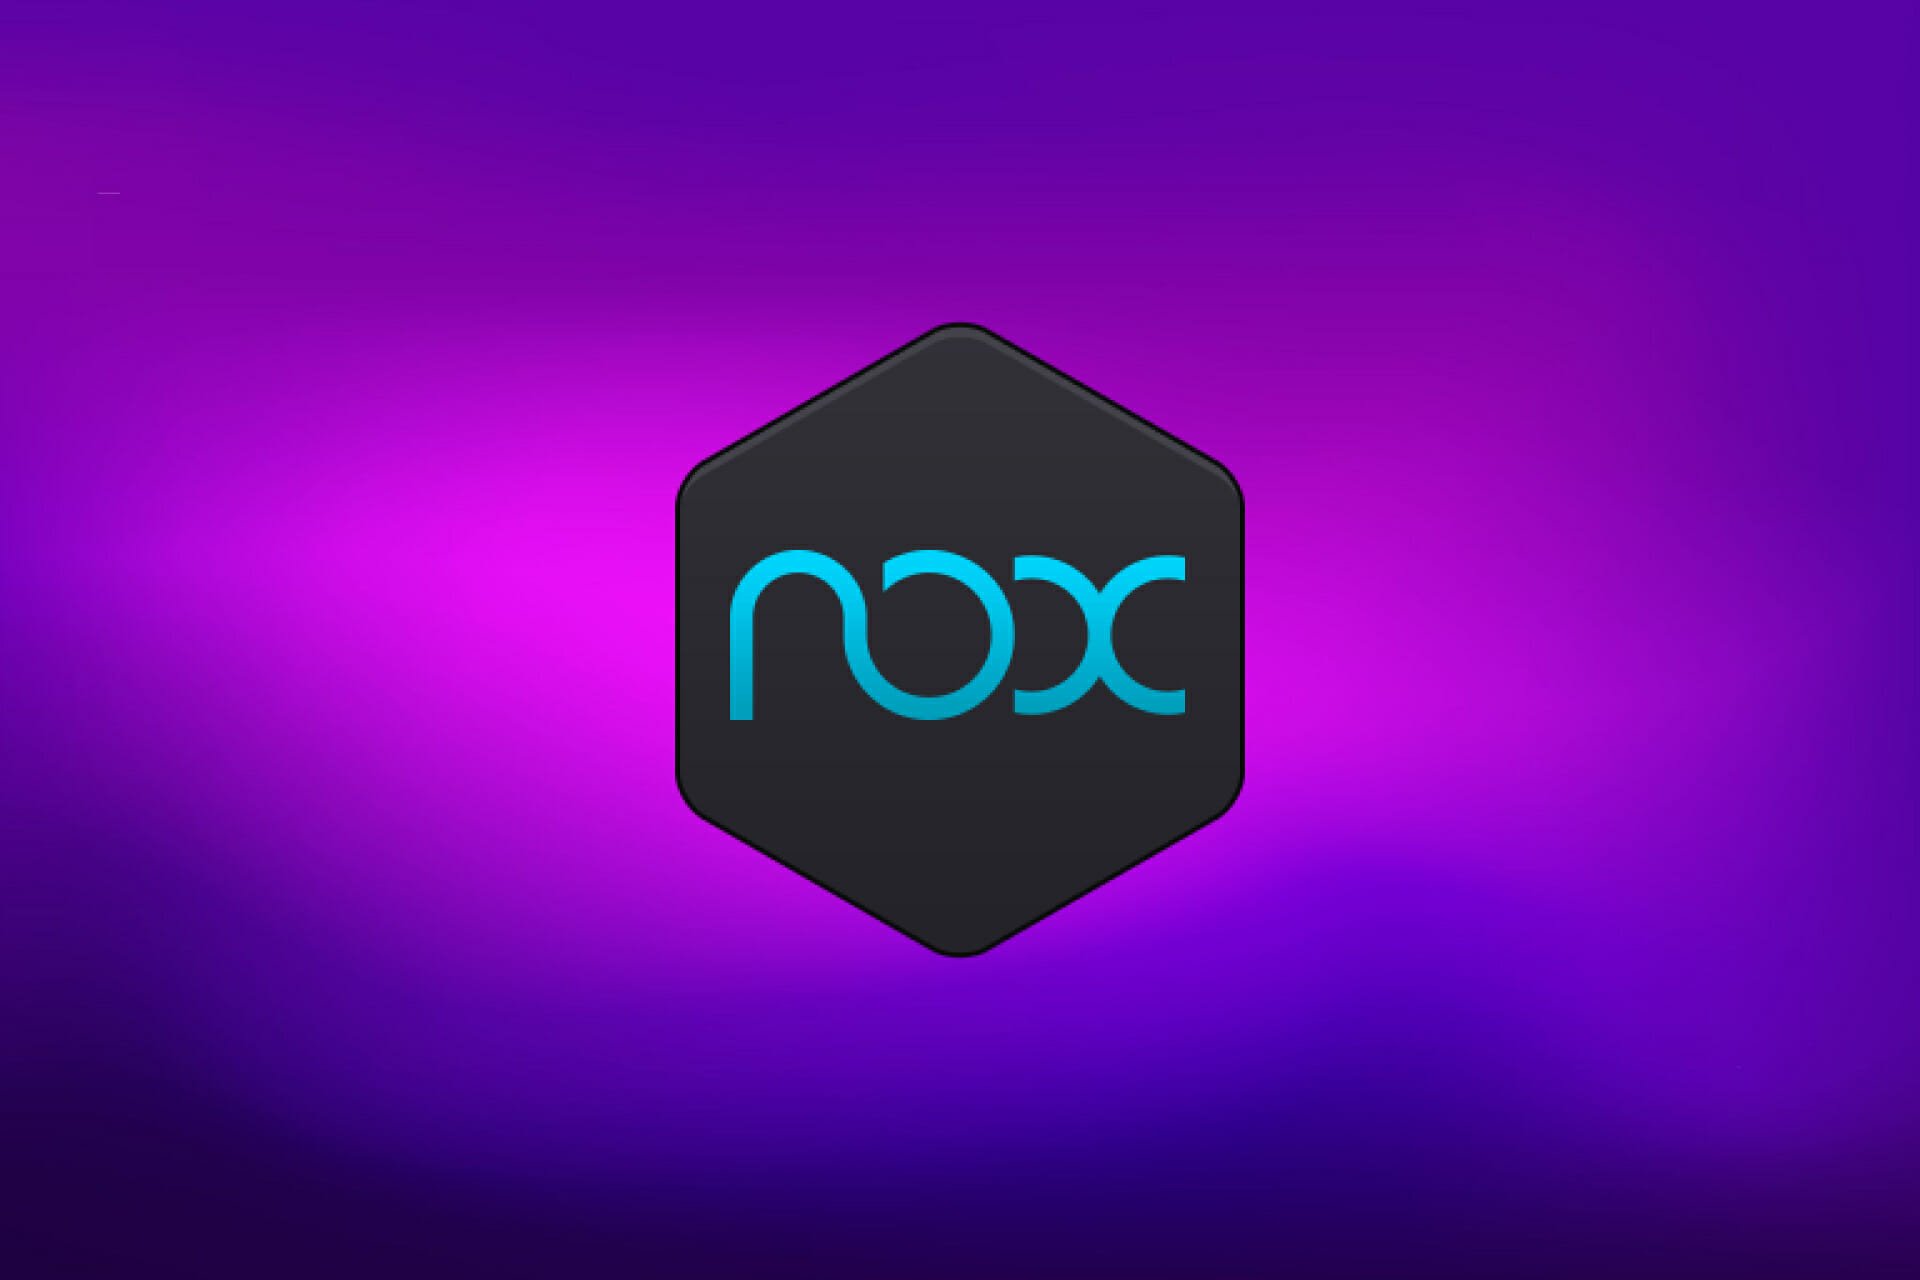 nox android emulator on pc and mac